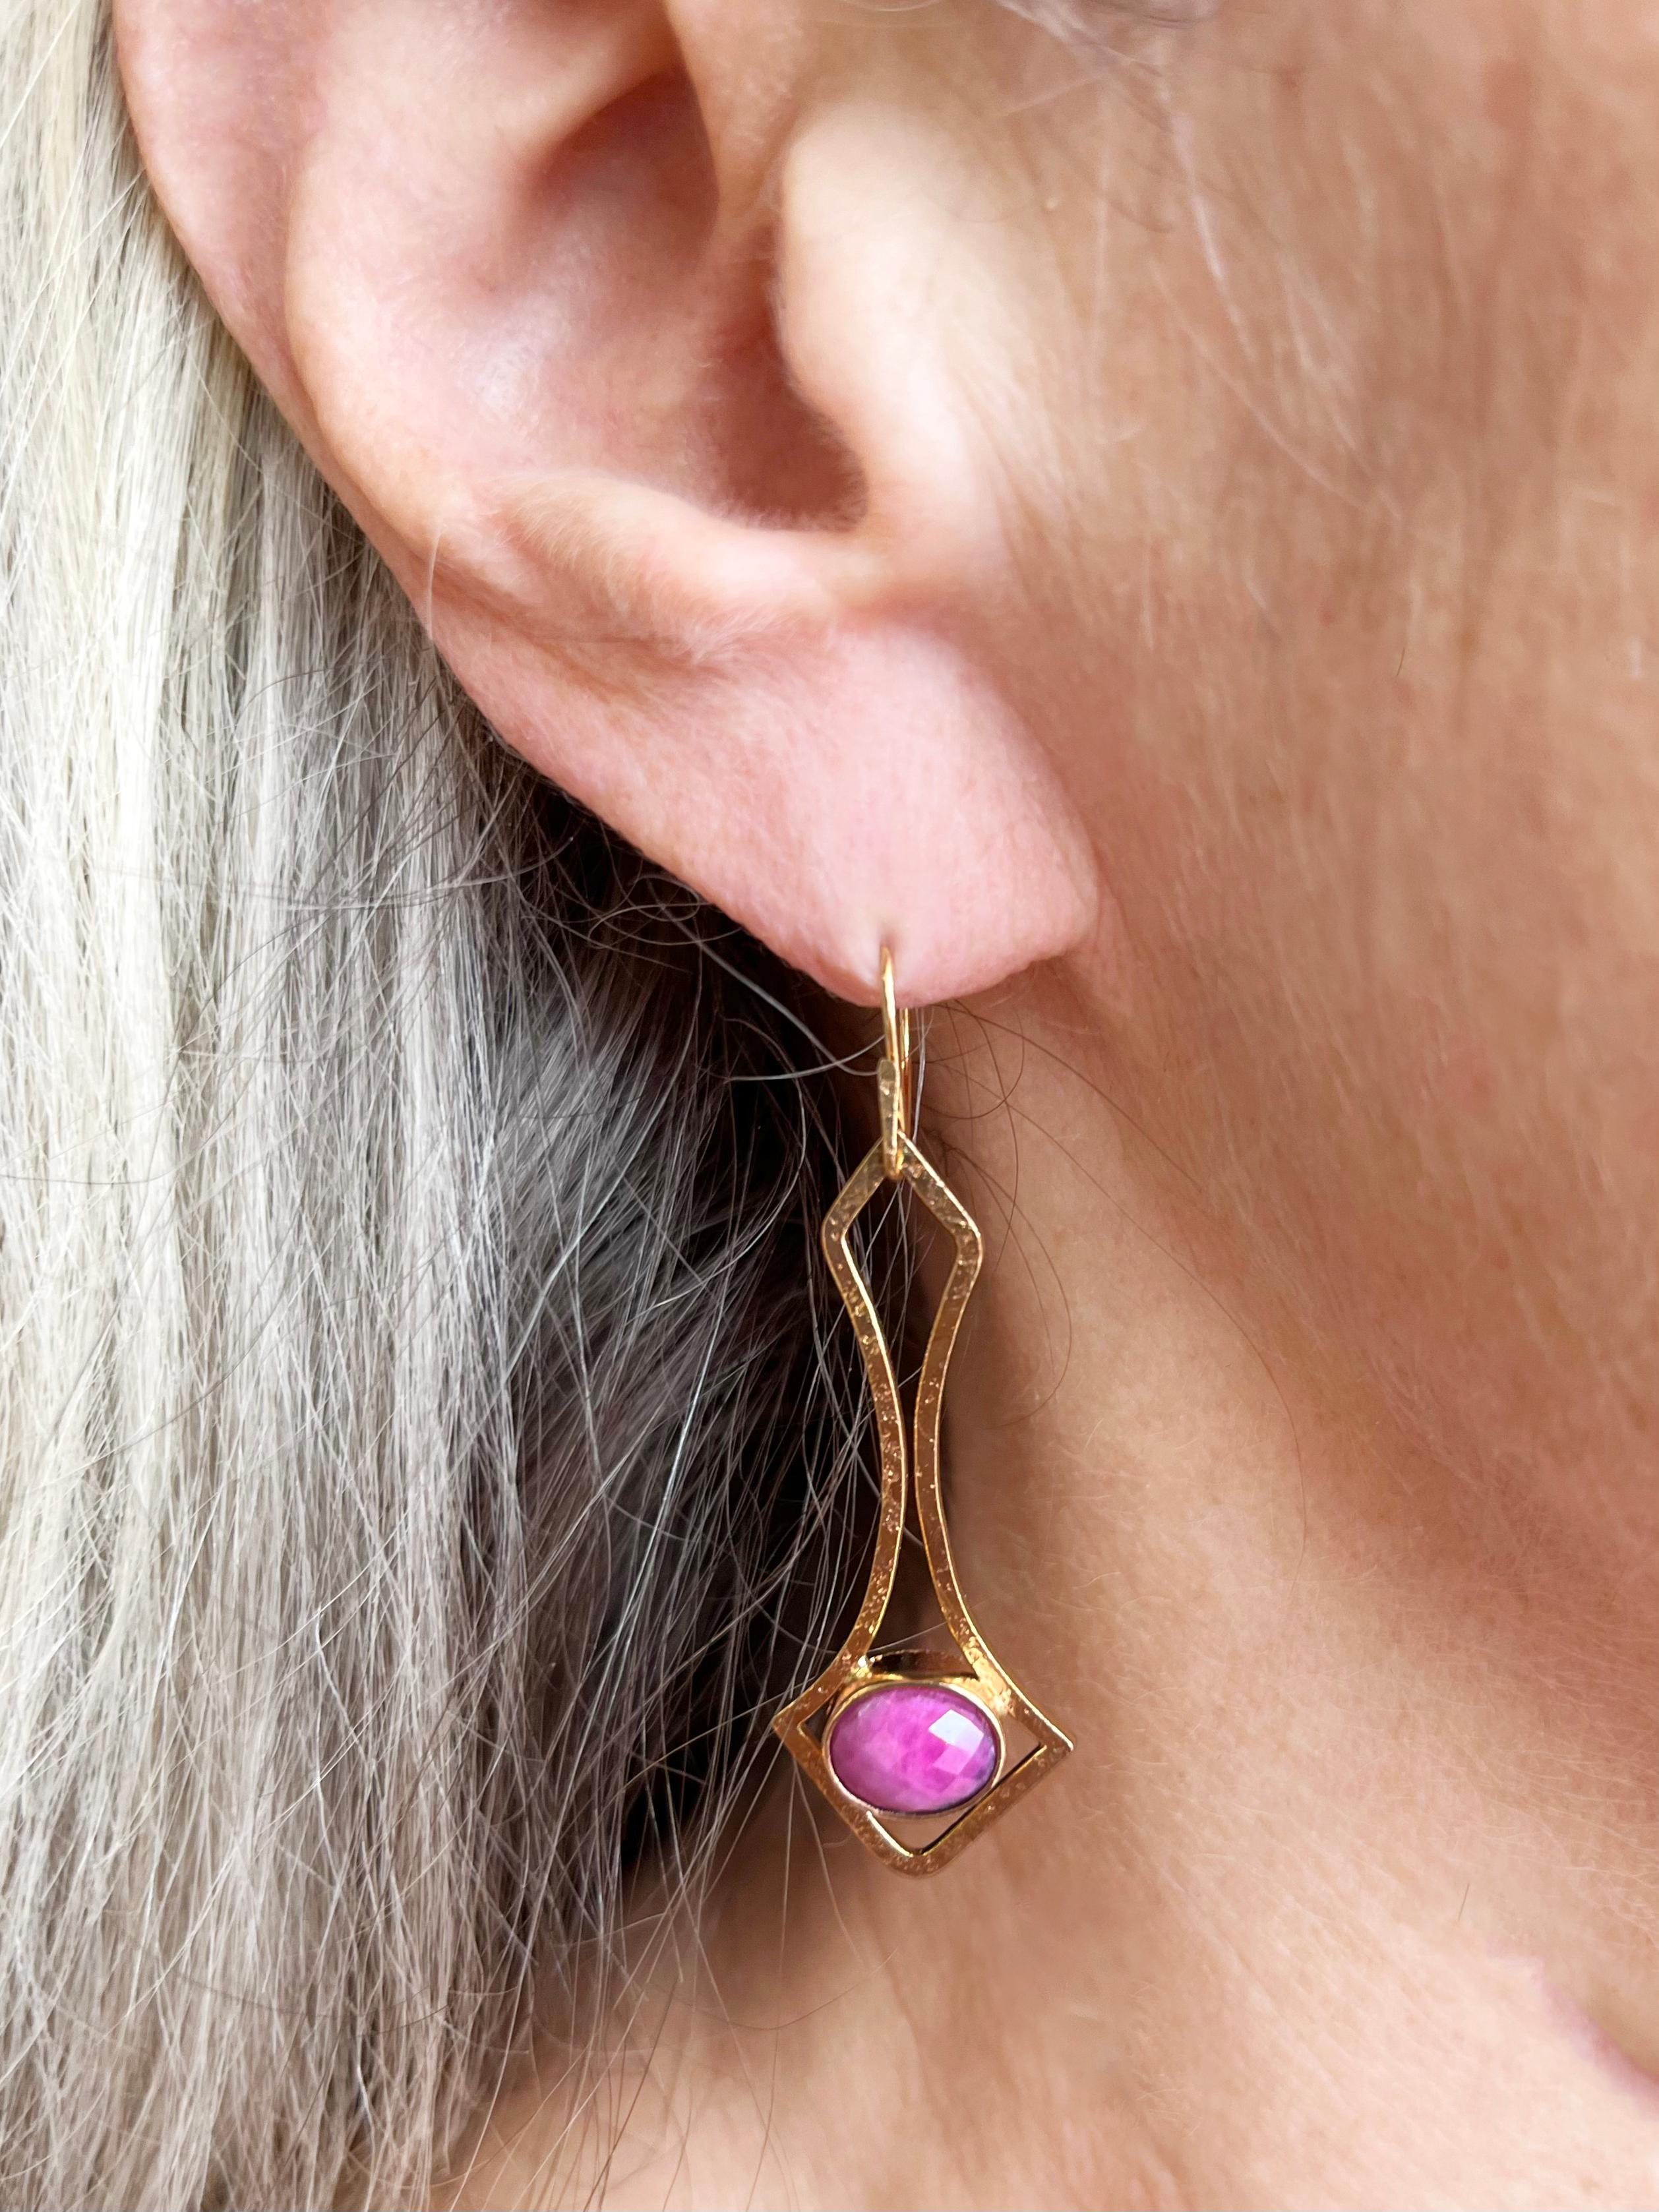 These bodacious beauties -  our one-of-a-kind 18kt Fairmined Yellow Gold and Oval Rose-Cut Ruby Earrings are a show stopper. The Rubies are the luscious color of pink peonies surrounded by a hand hammered fine gold texture that makes the 18kt yellow